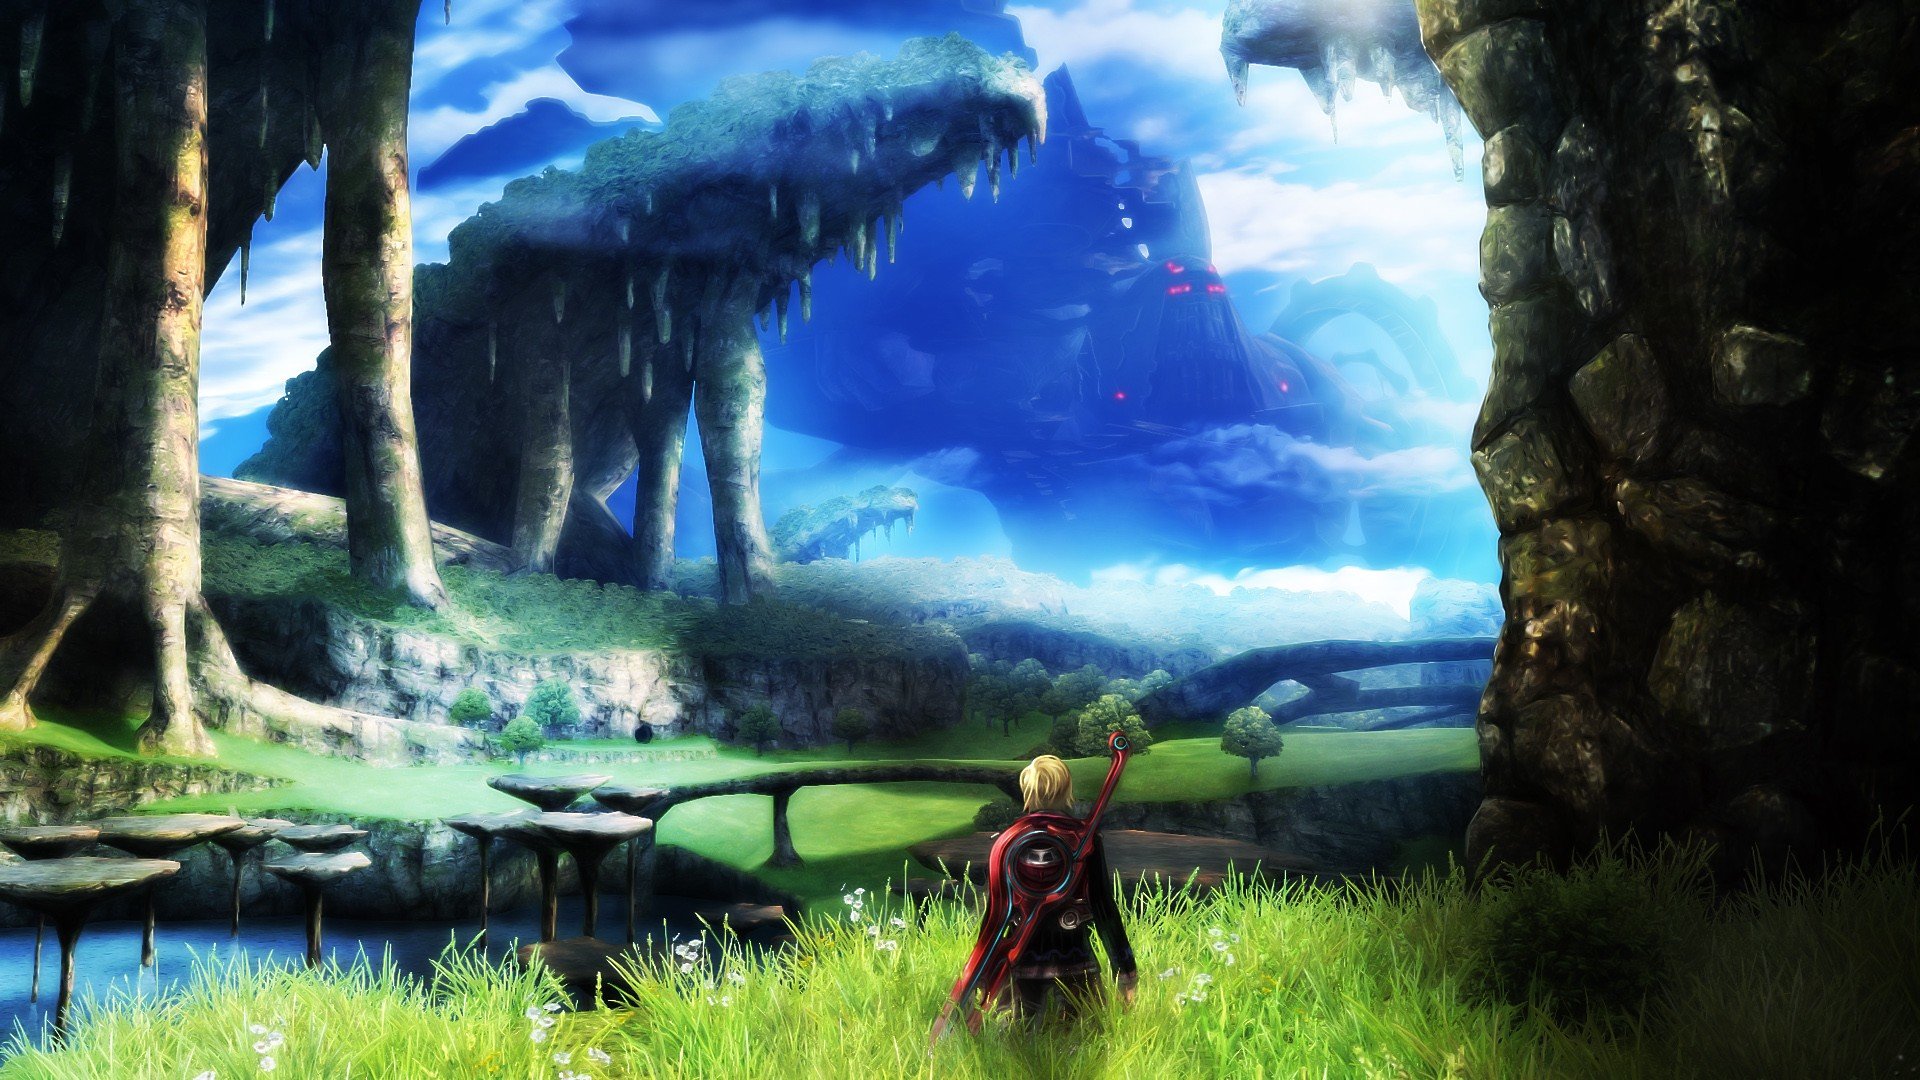 Download hd 1920x1080 Xenoblade Chronicles desktop background ID:111435 for free